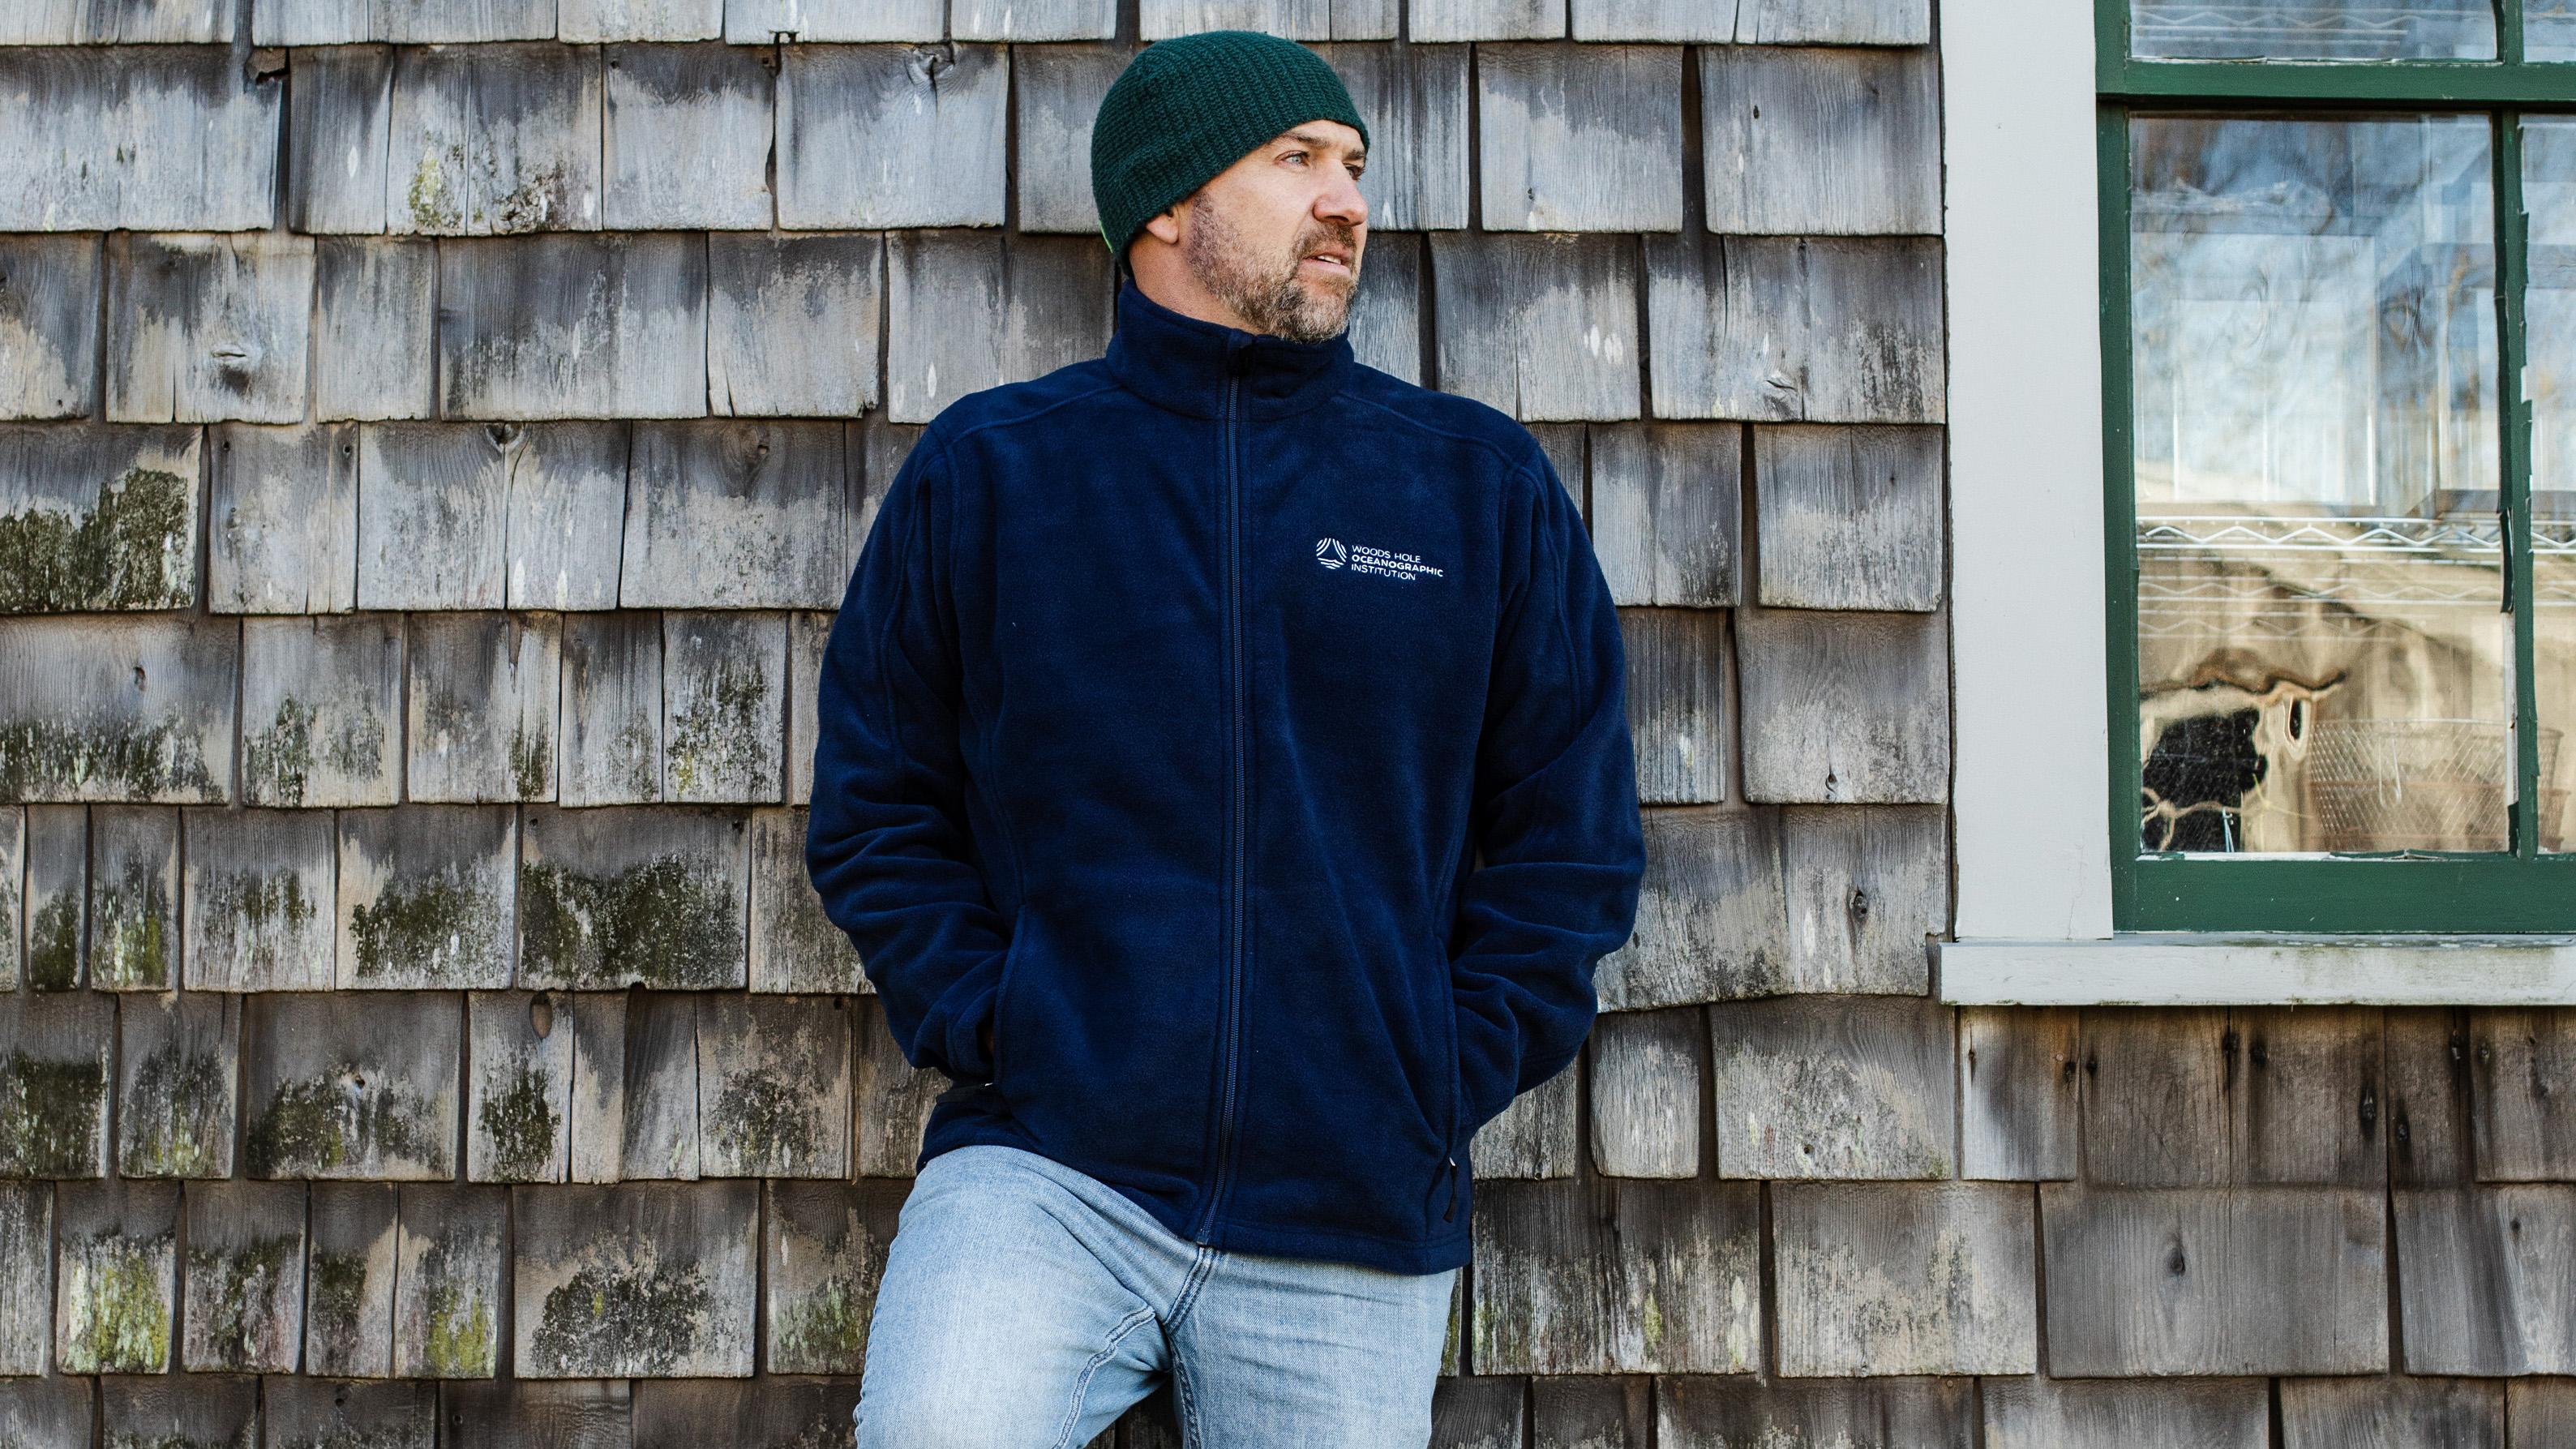 Stay warm with our WHOI fleece jackets